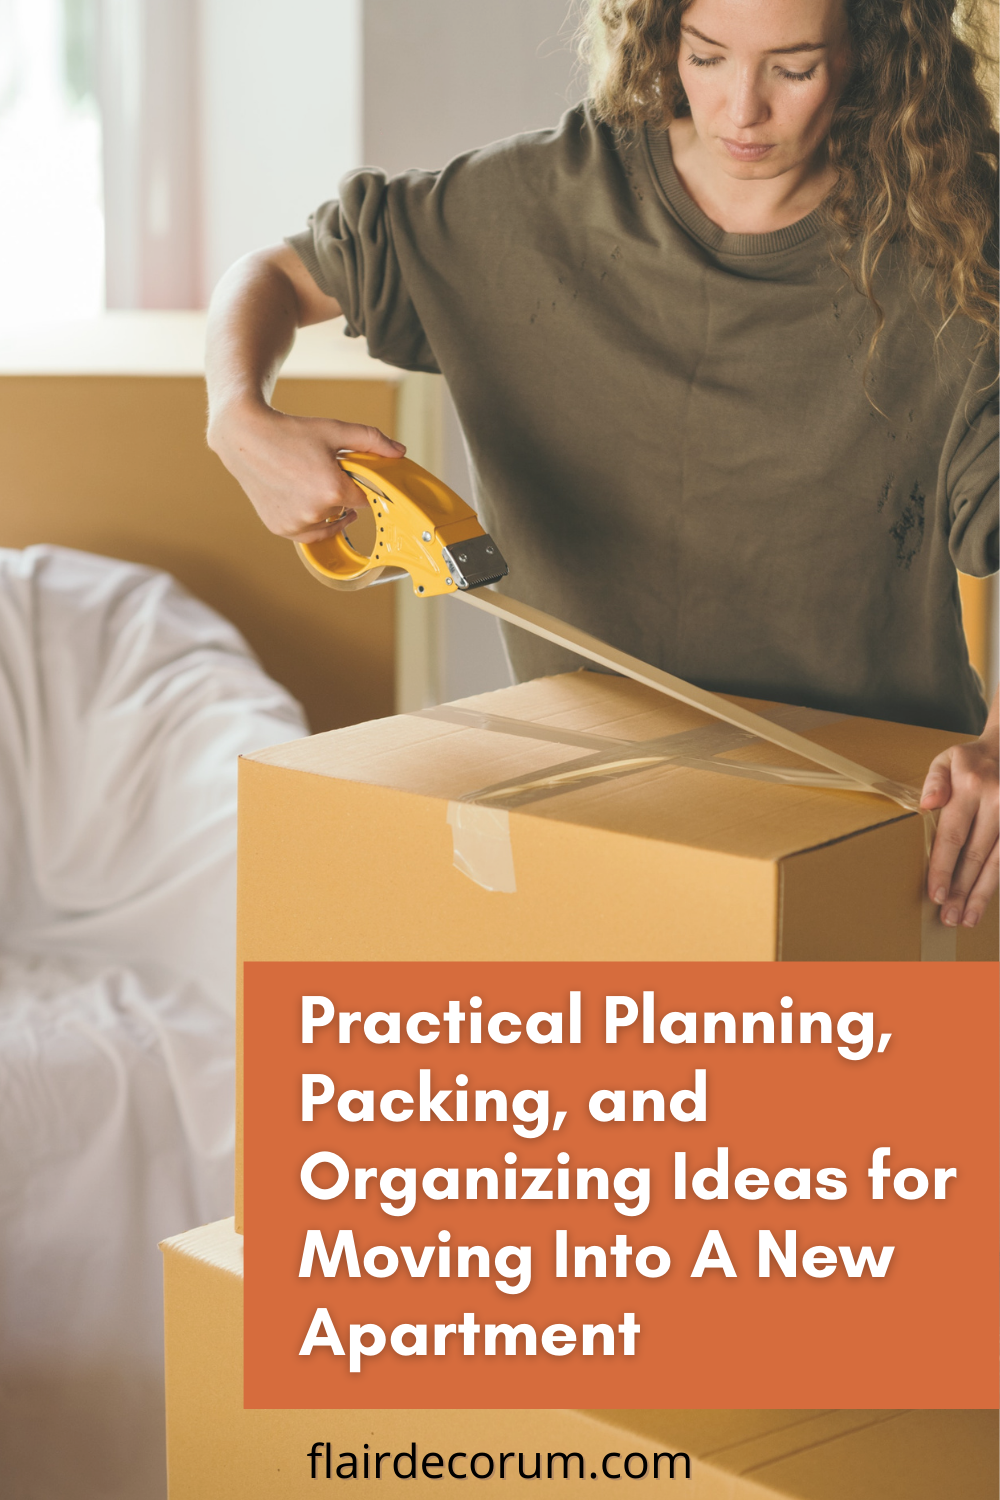 Pinterest pin about planning, packing and organizing your move to a new apartment